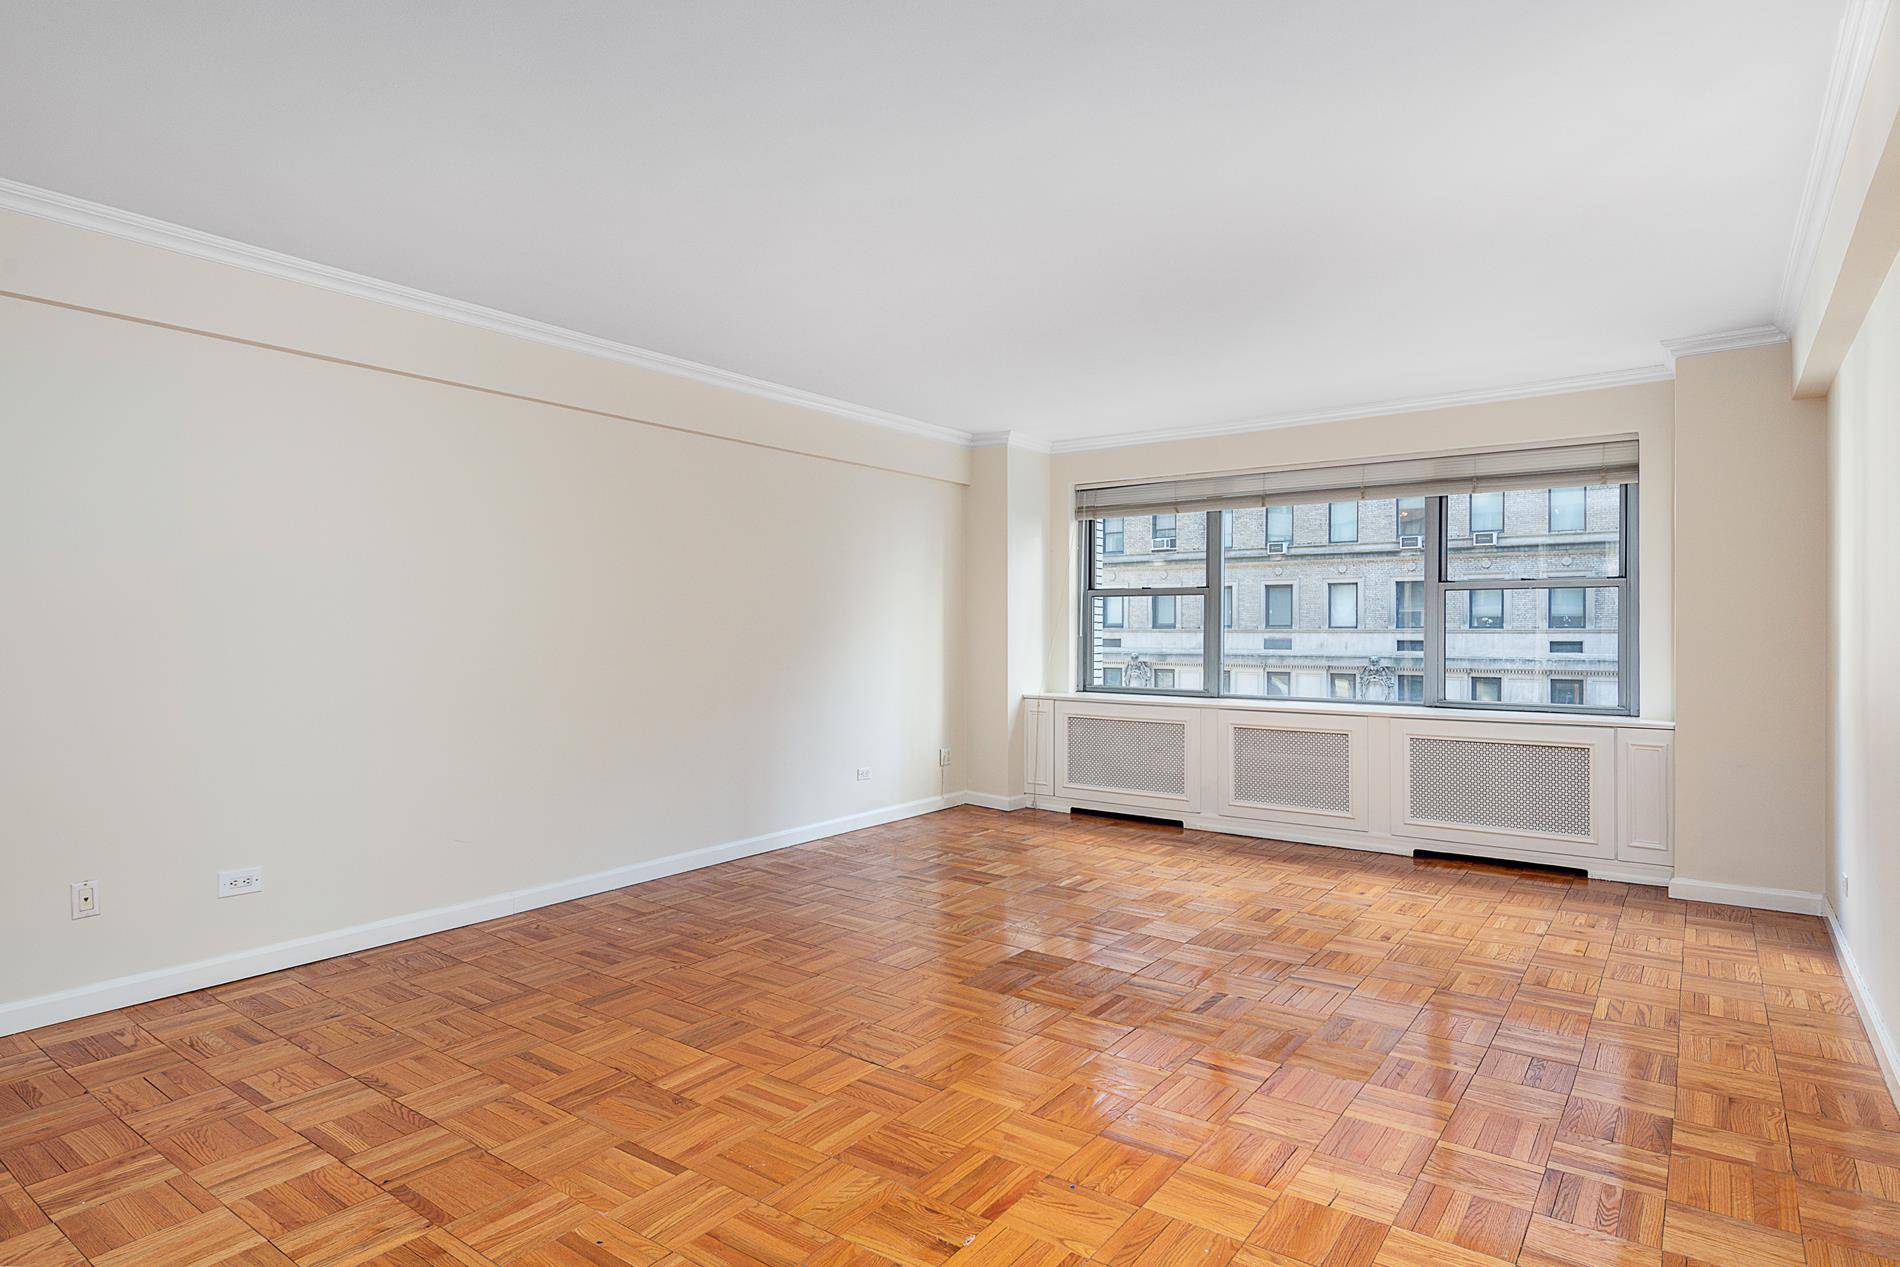 Location, Location, Location This rarely available spacious one bedroom apartment is the perfect home or Pied a Terre.